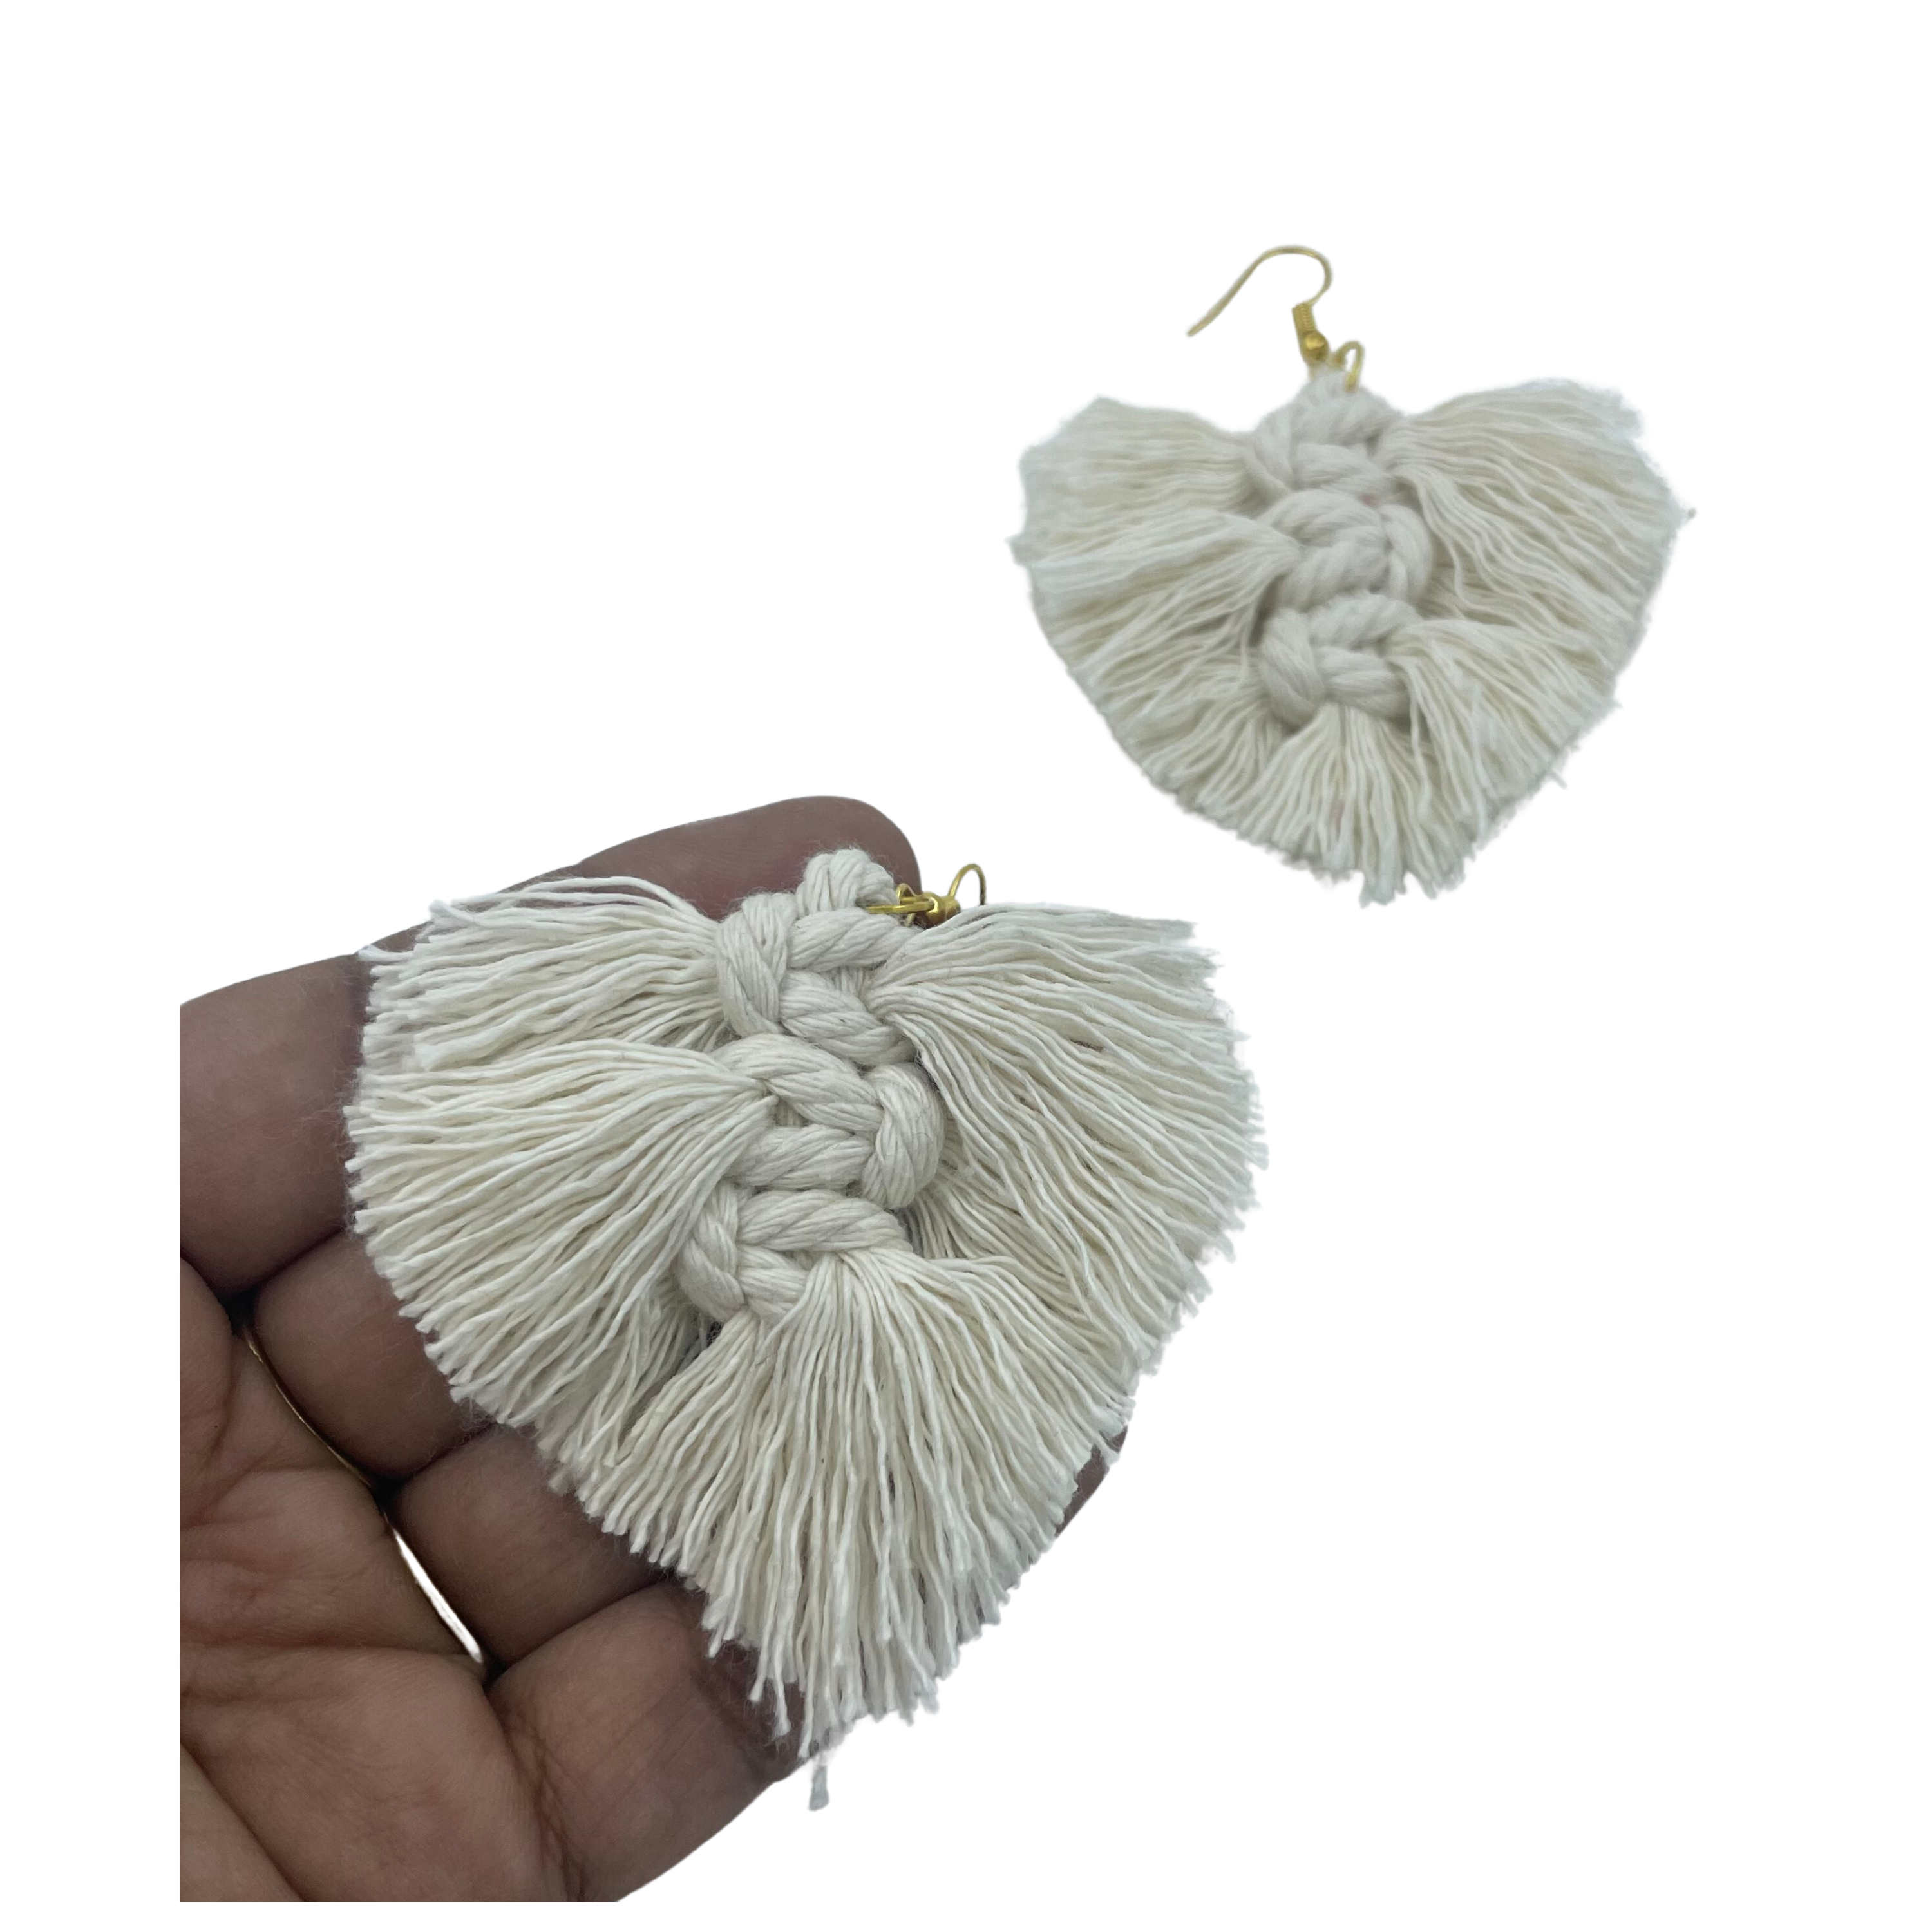 Silk Thread Earrings - Buy Silk Thread Earrings Online Starting at Just ₹90  | Meesho